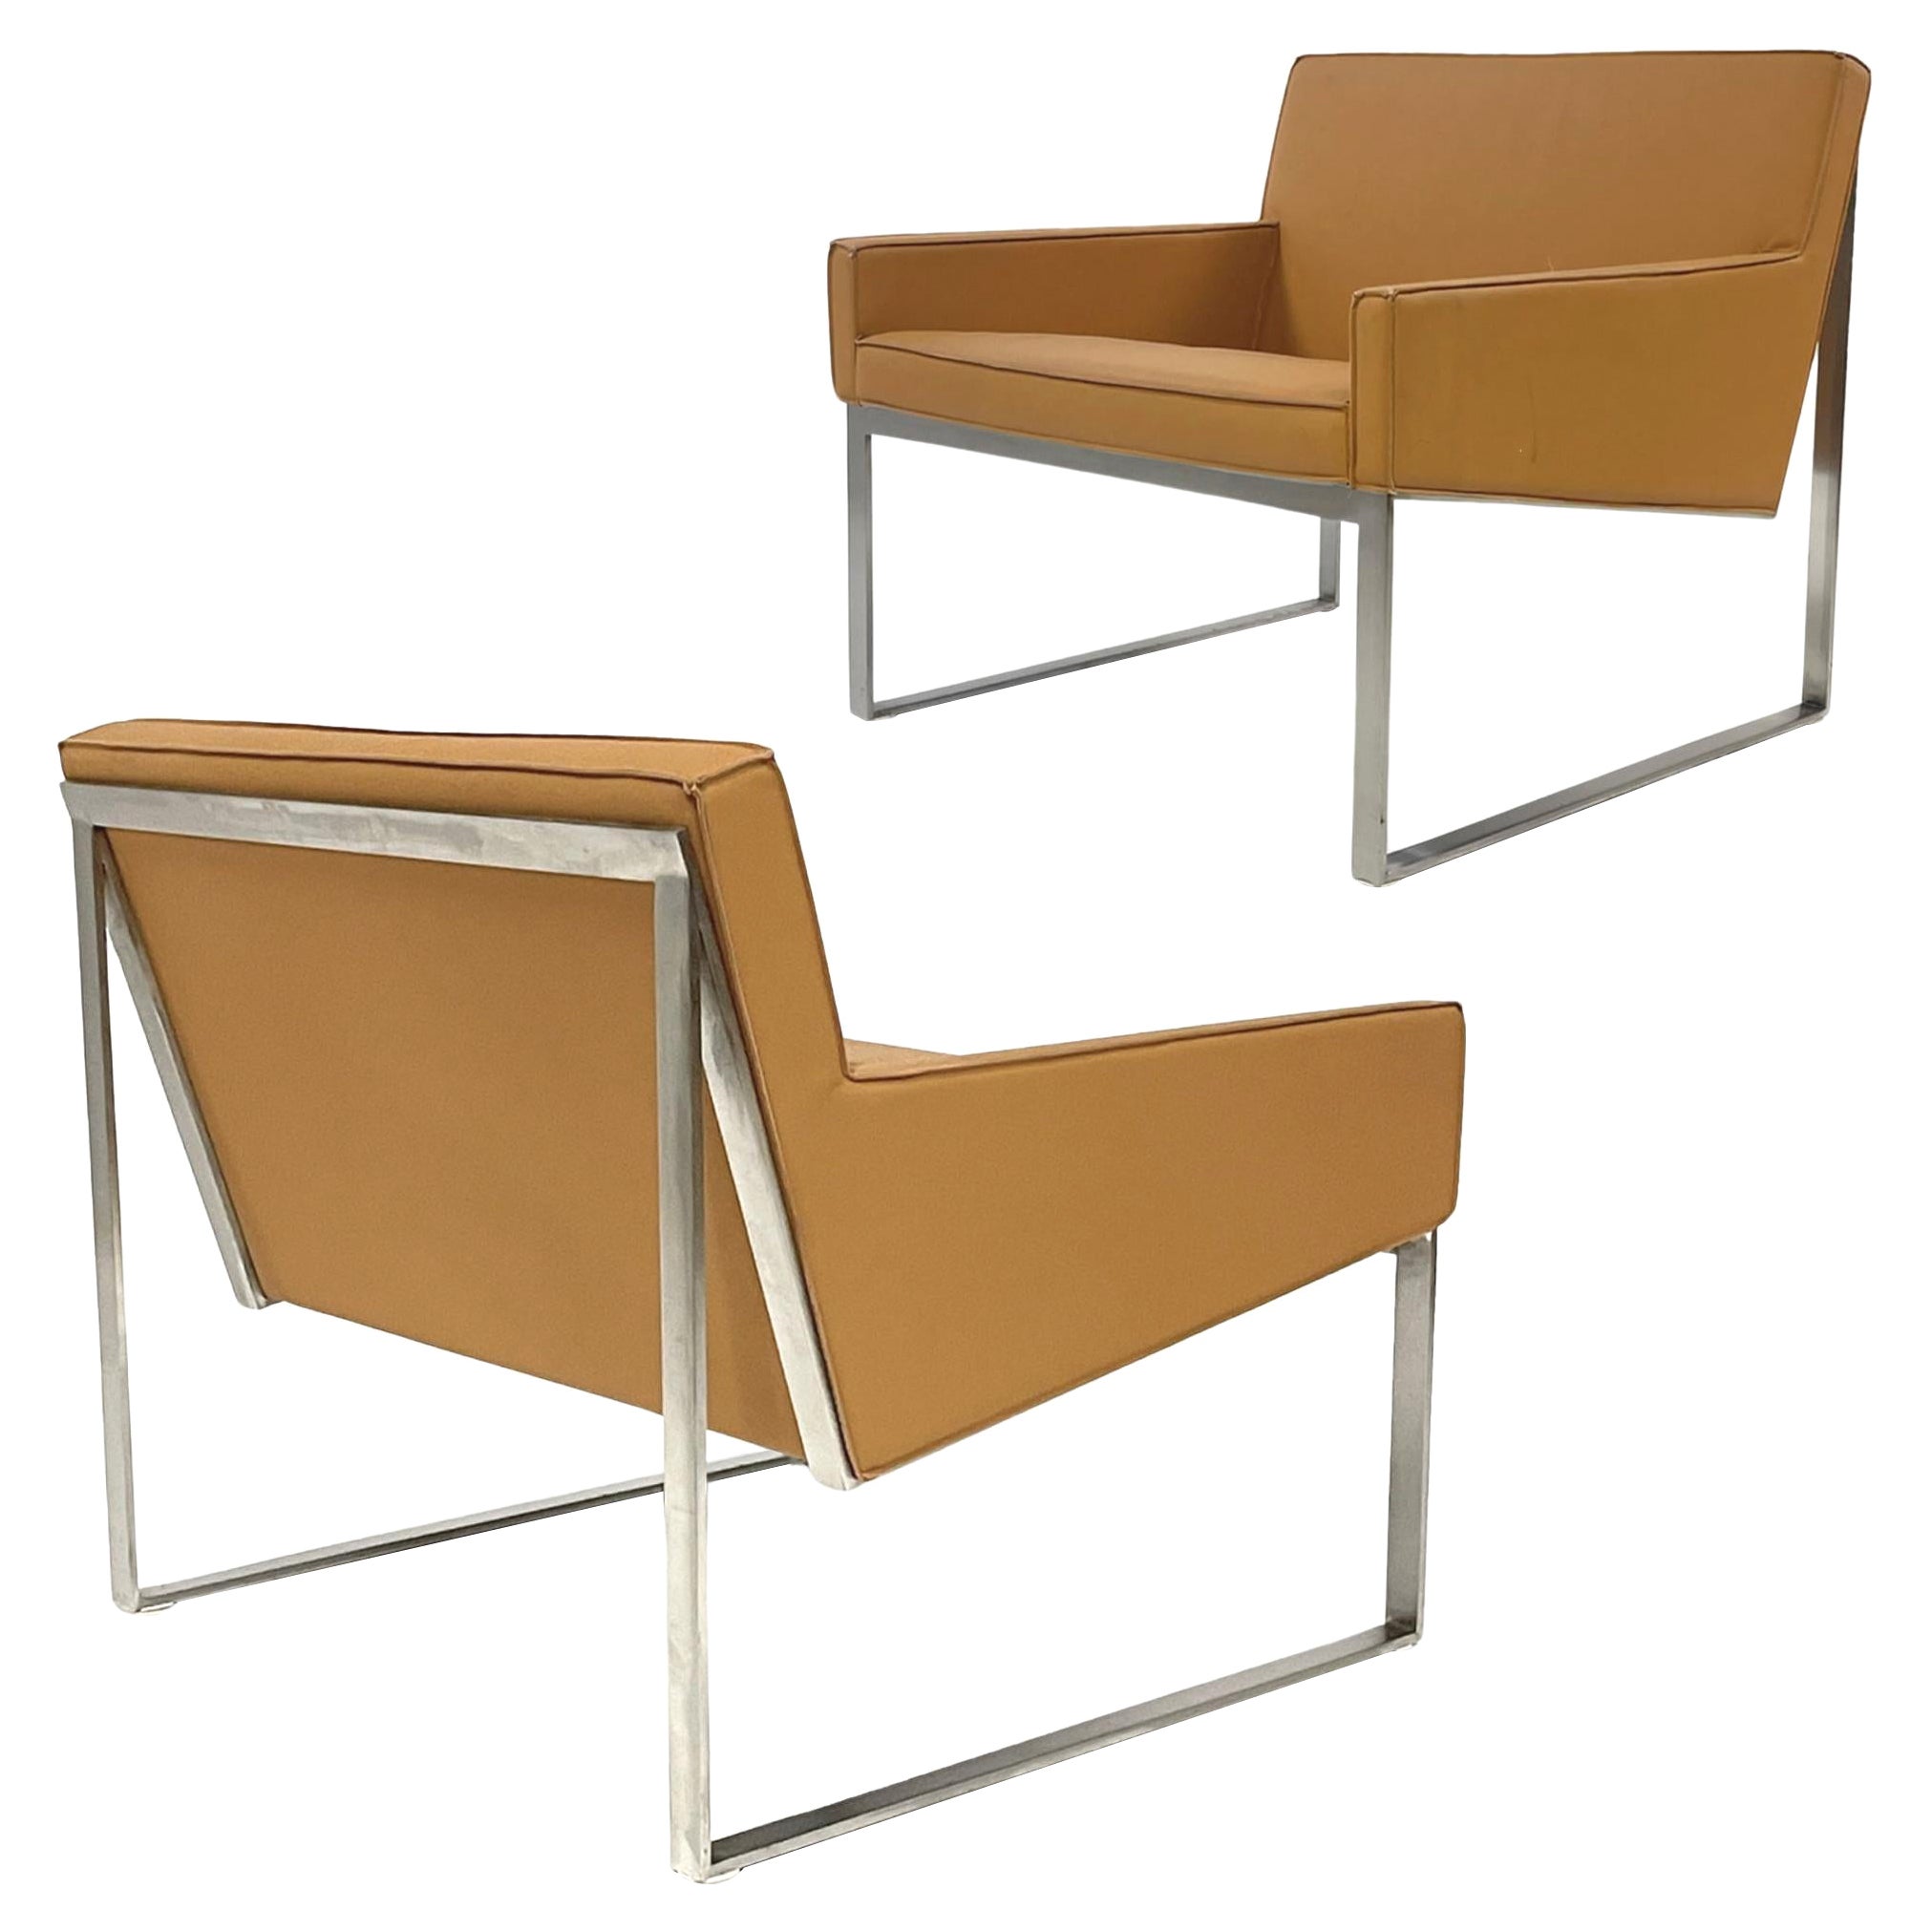 Tan Leather & Brushed Nickel Lounge Chairs by Fabien Baron -Bernhardt 4 Avail For Sale